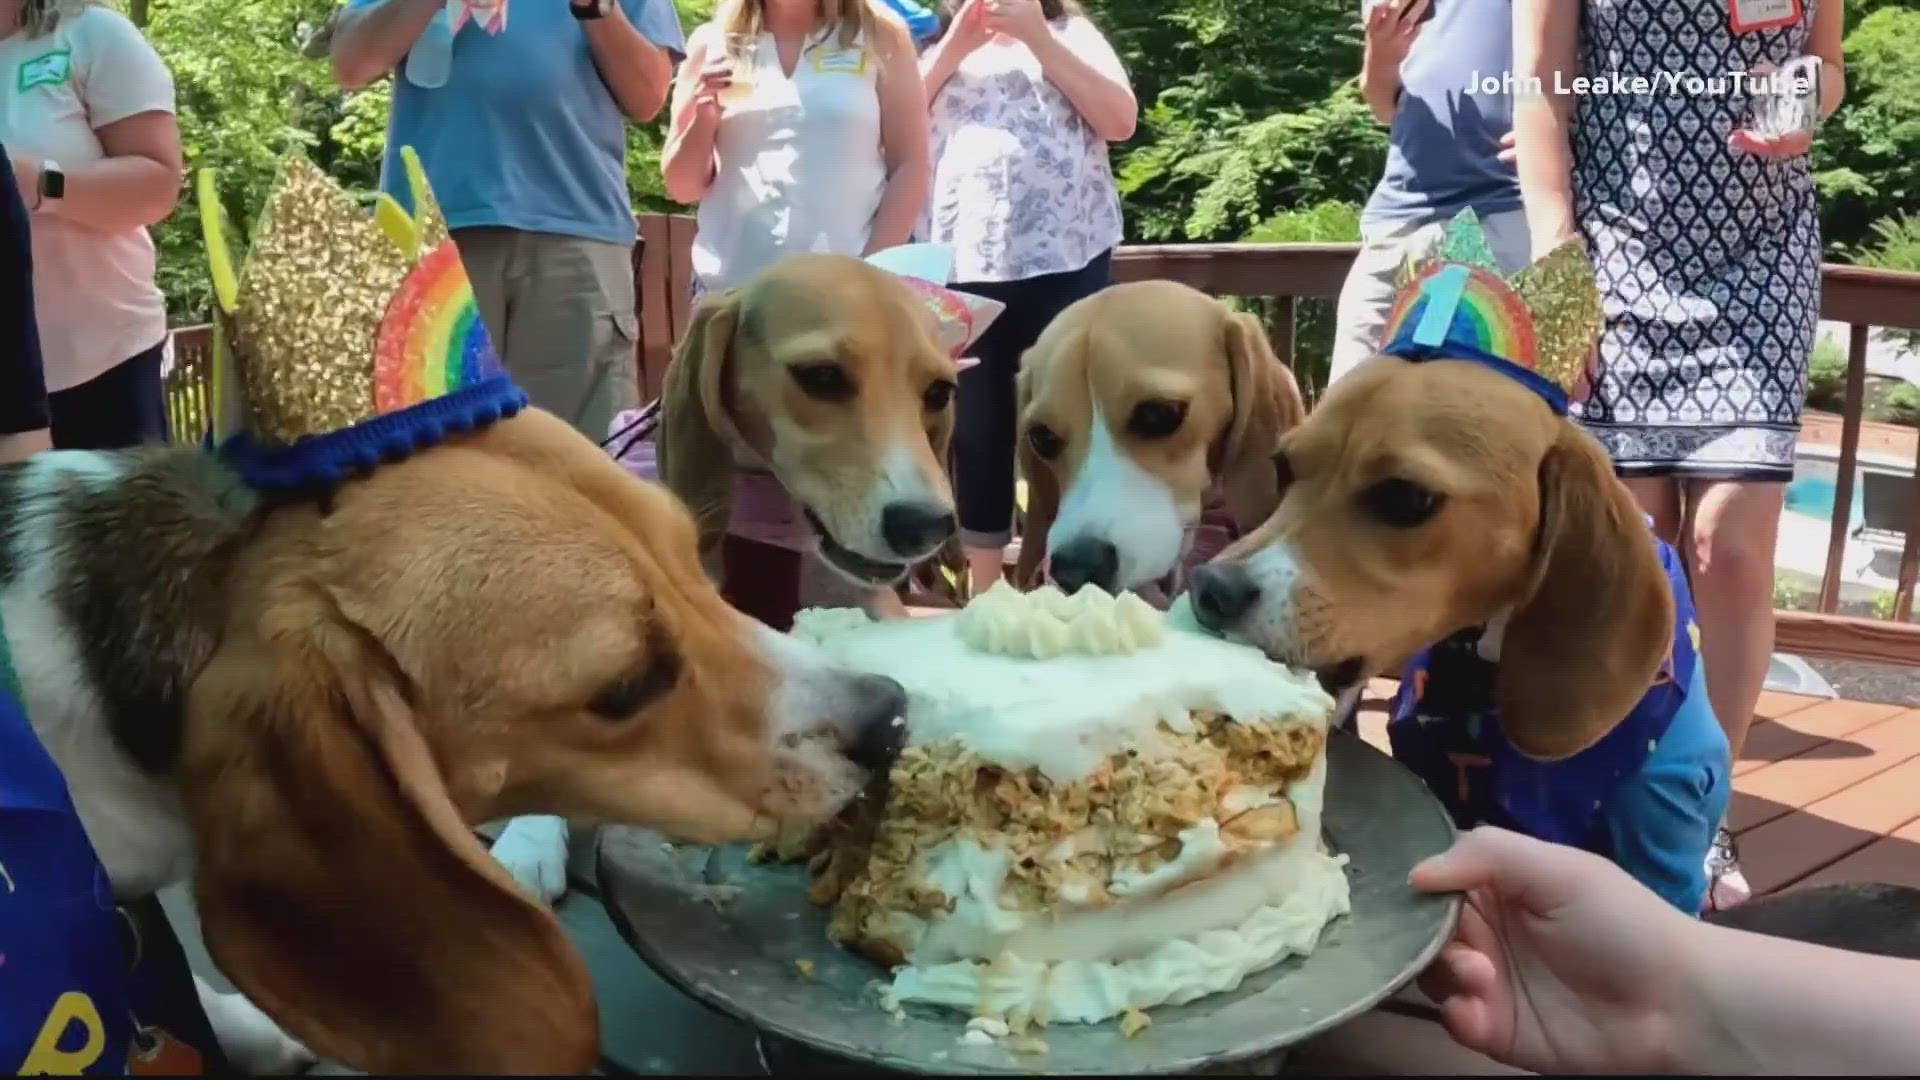 These dogs were among the THOUSANDS of Beagles rescued last year from a breeding center that sold dogs to labs that conducted experiments on animals in Virginia.